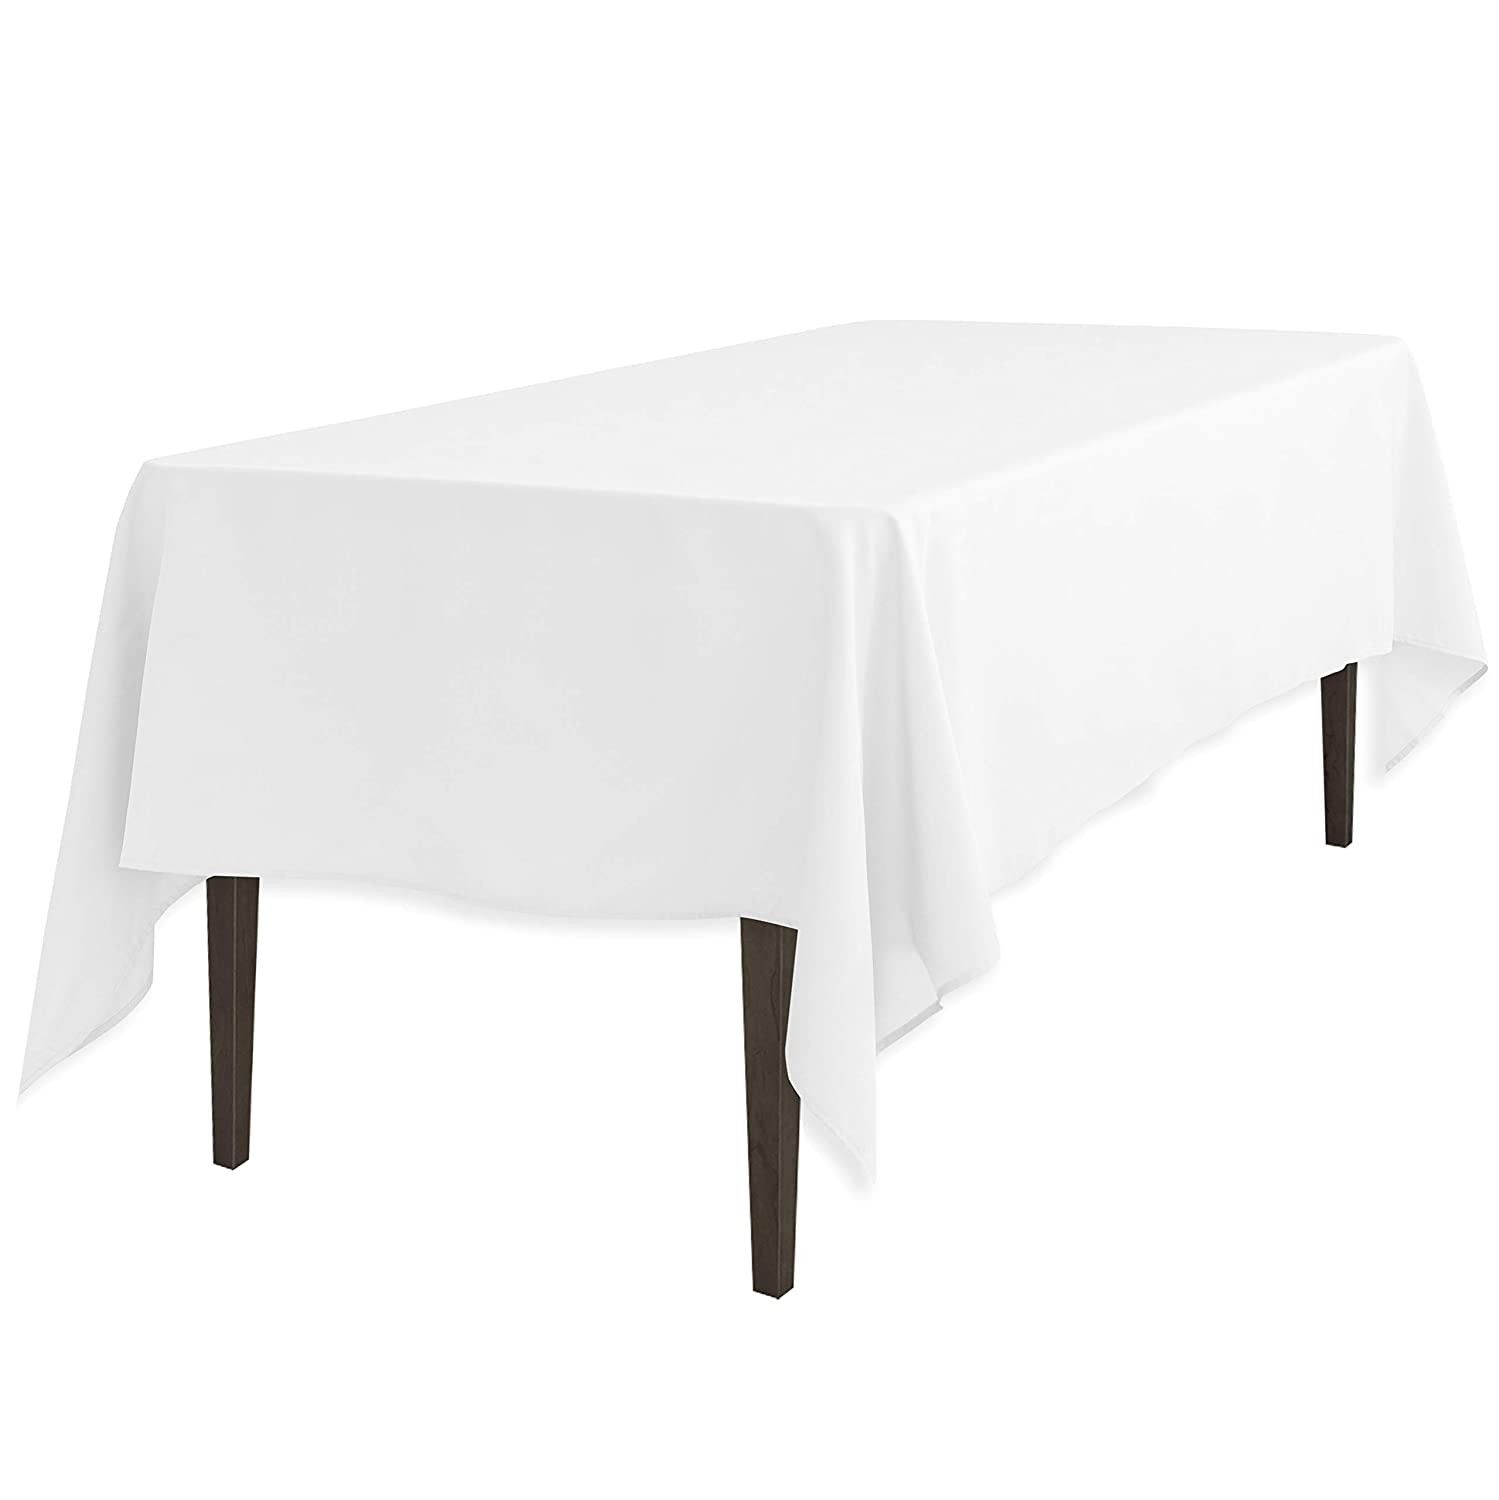 All white table cloths; wedding style